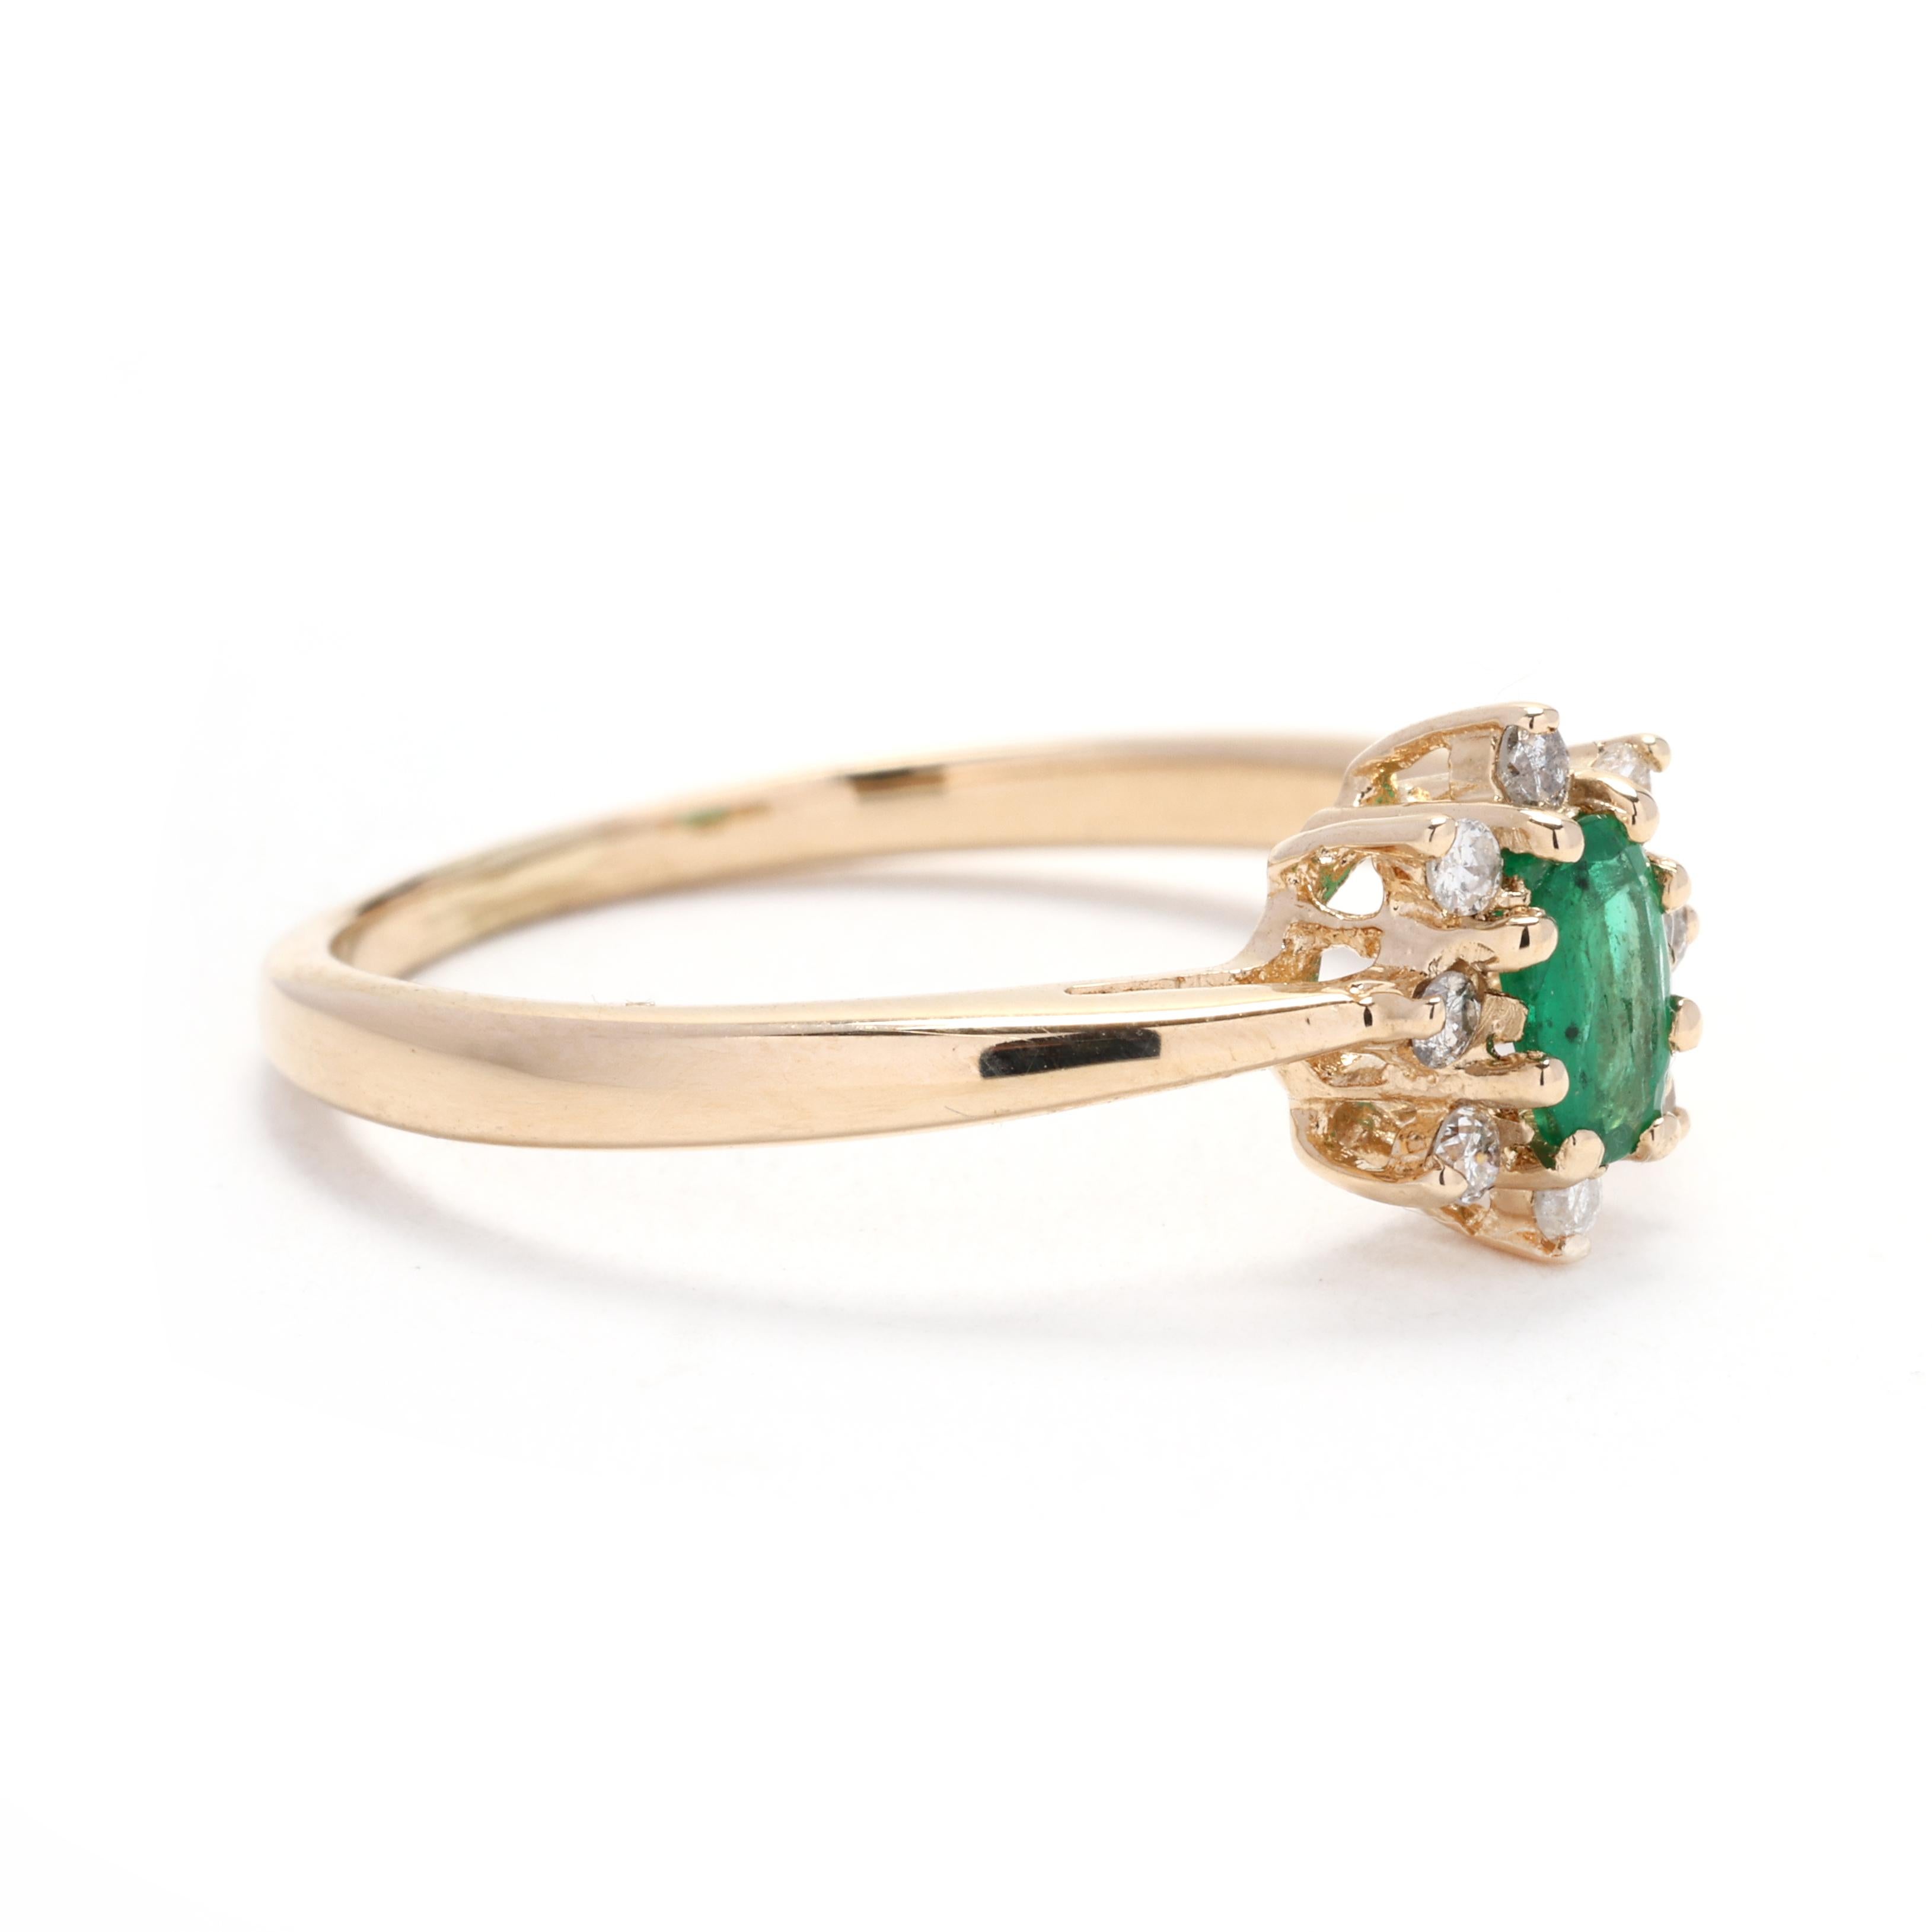 This stunning emerald and diamond cluster ring is the perfect addition to your jewelry collection. Crafted in 14k yellow gold, this ring features a beautiful flower design with a central 0.25 carat emerald surrounded by sparkling diamonds. The